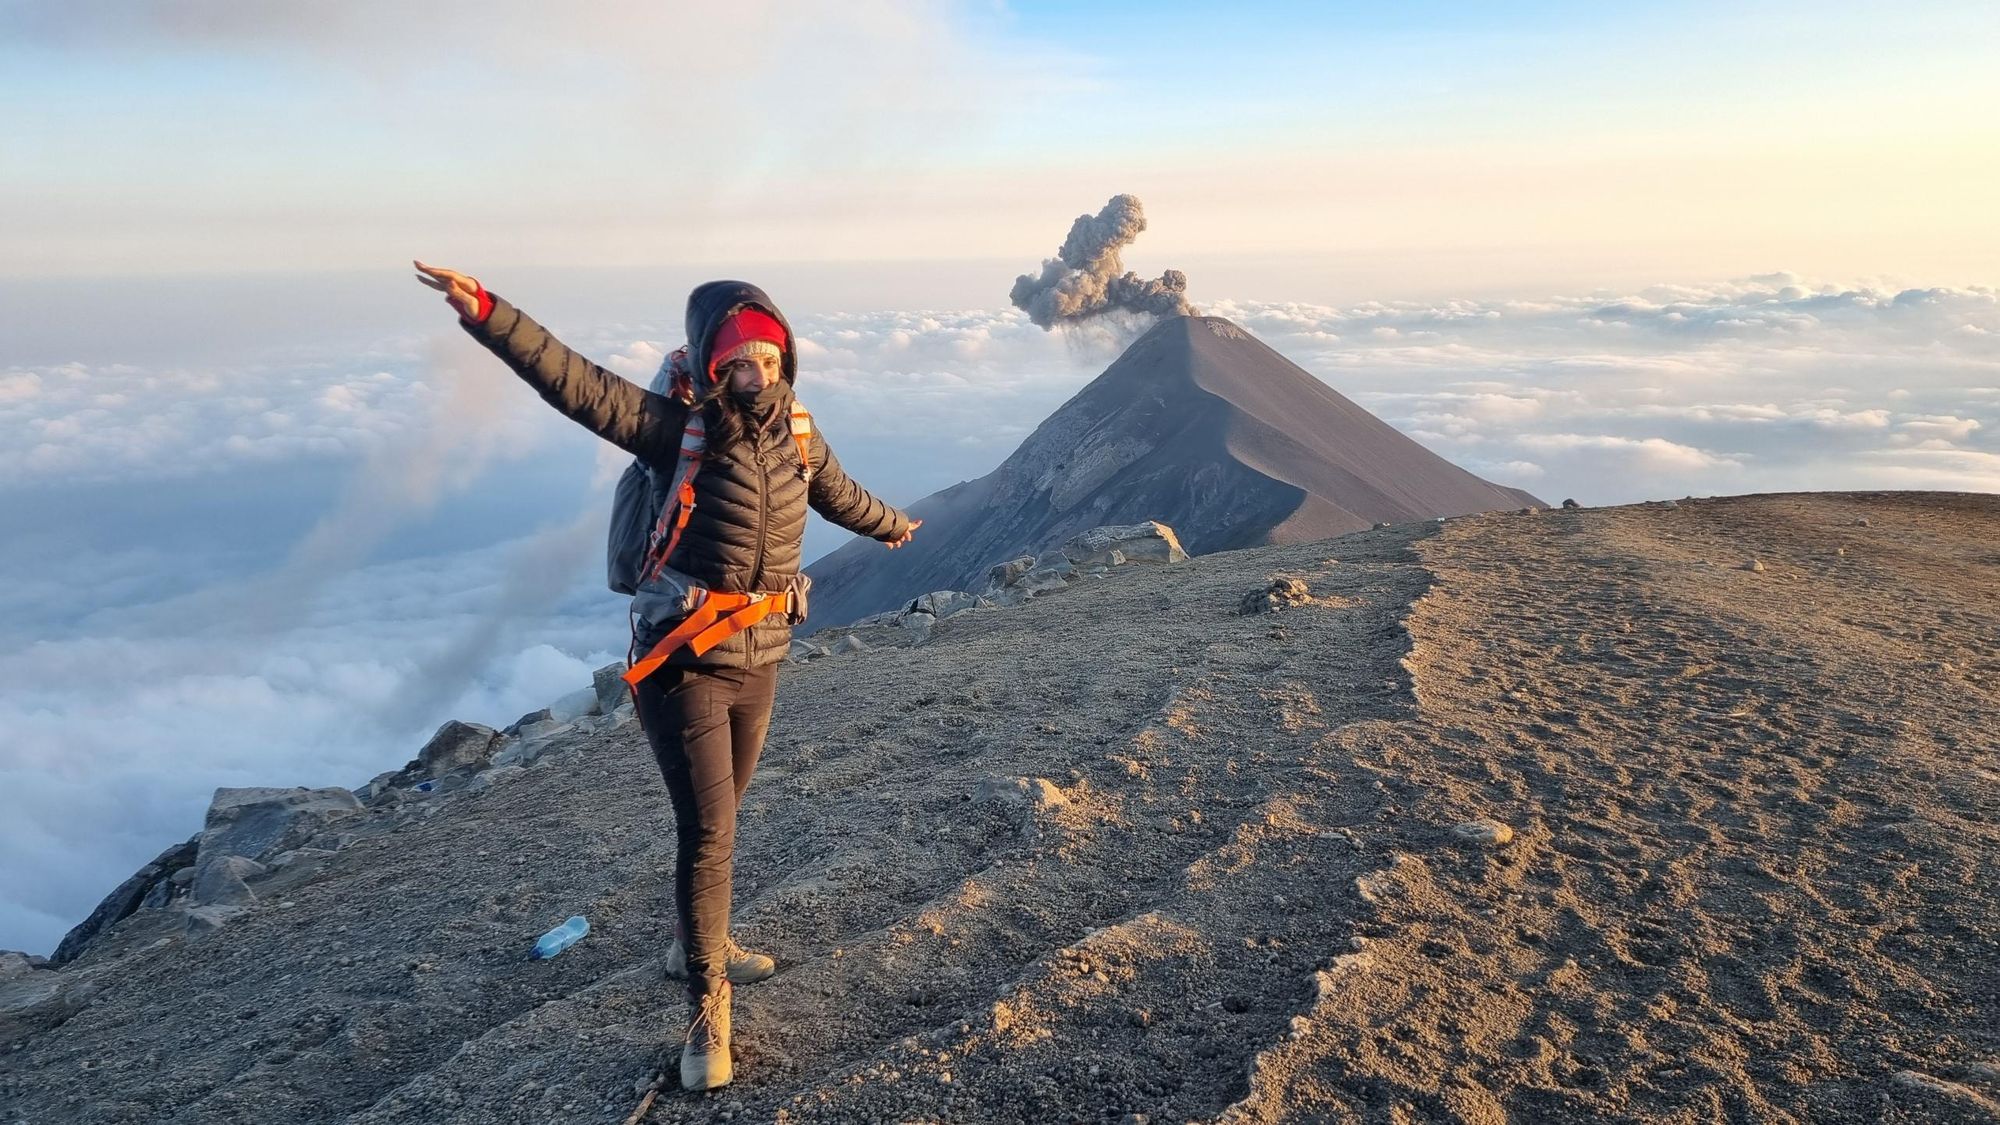 A hiker poses on the summit of Acatenango Volcano, while Fuego erupts in the background